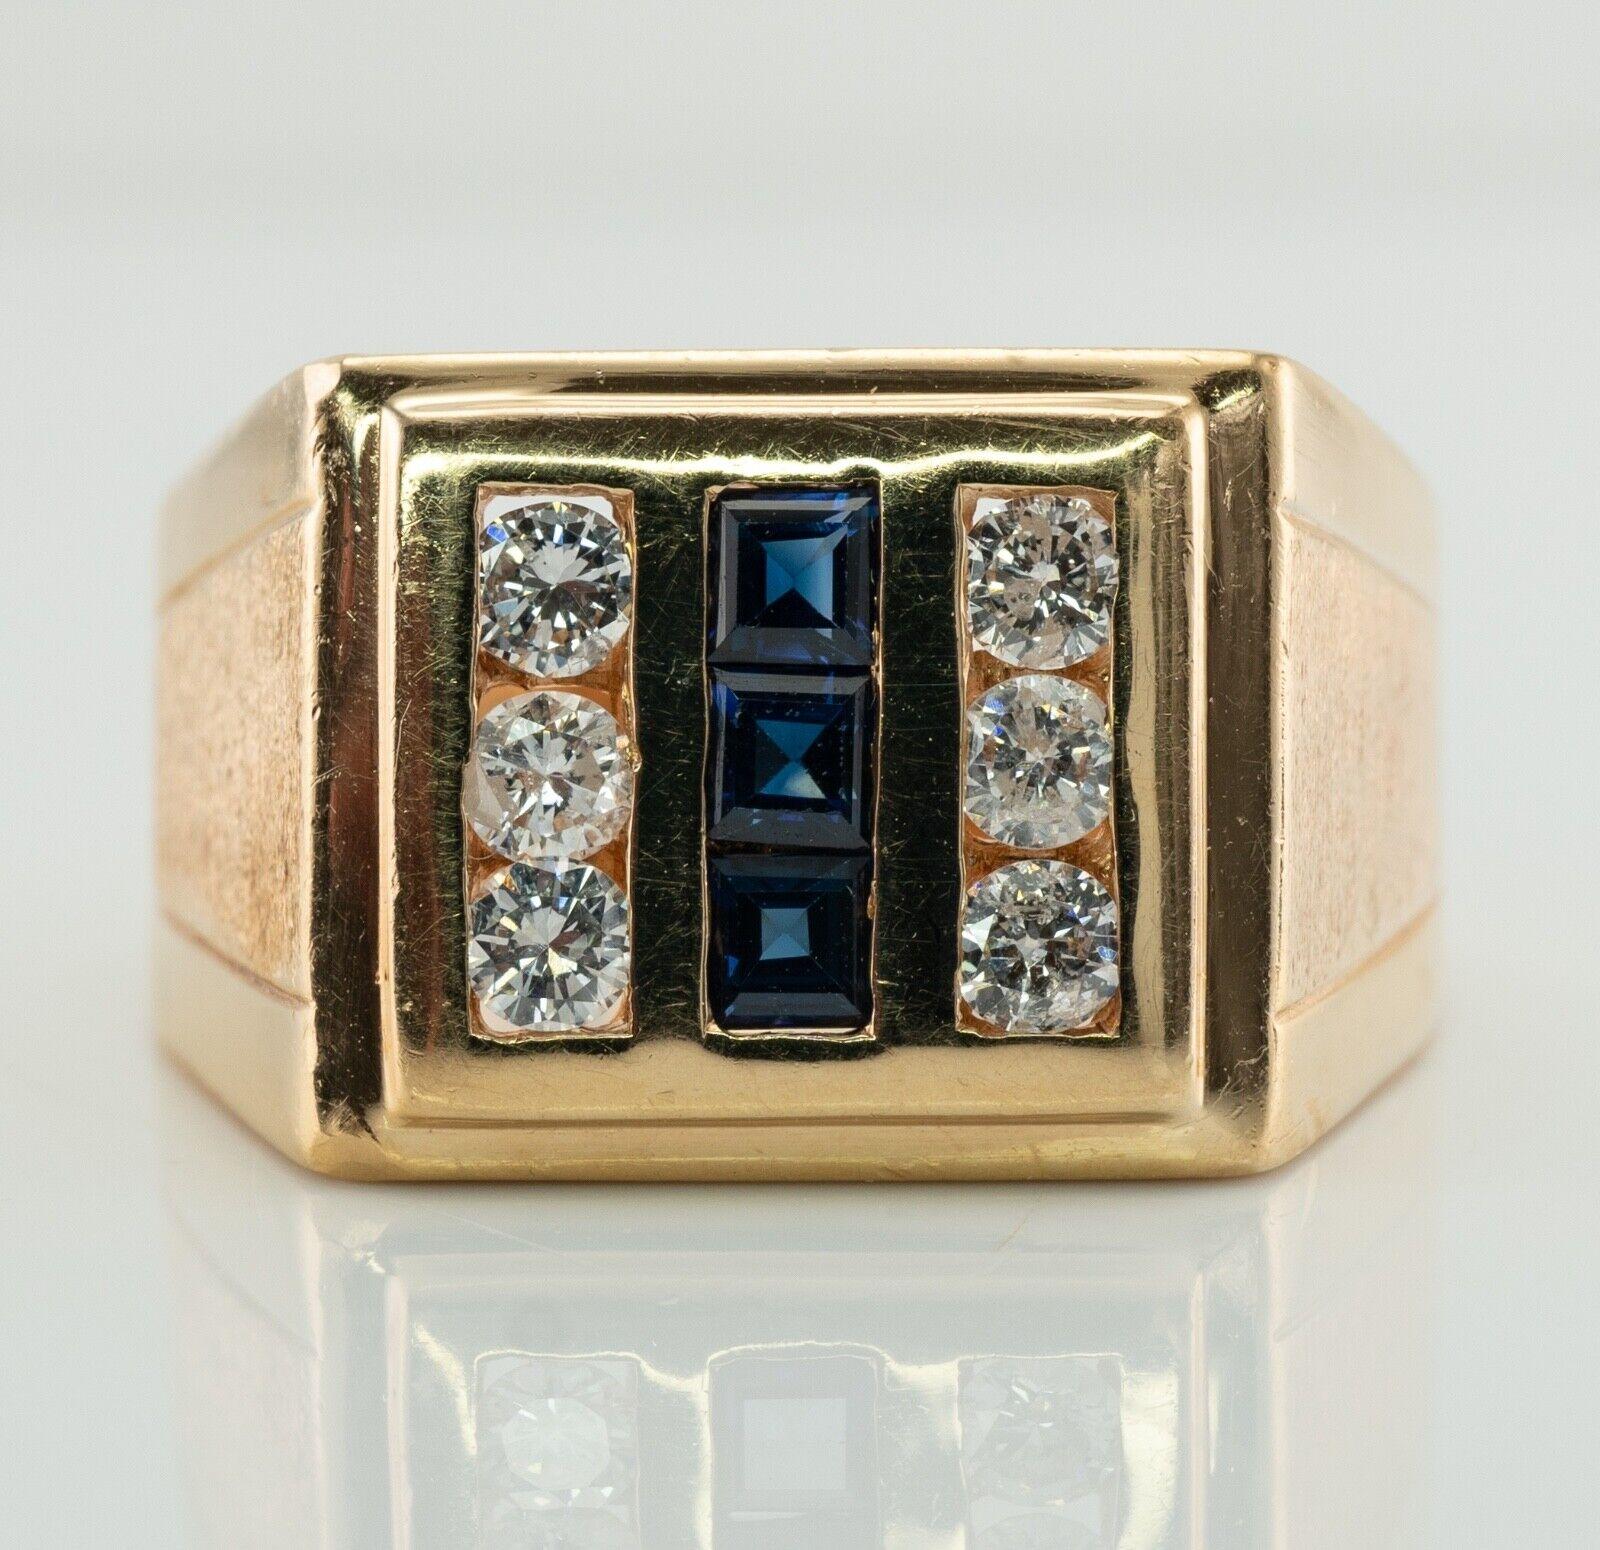 This estate ring is crafted in solid 14K Yellow gold (stamped).
Three square cut natural blue Sapphires measure 3mm each (appr. .45 carat).
Six diamonds total .42 carat of SI1 to I1 clarity and H color.
The top of the ring measures 13mm